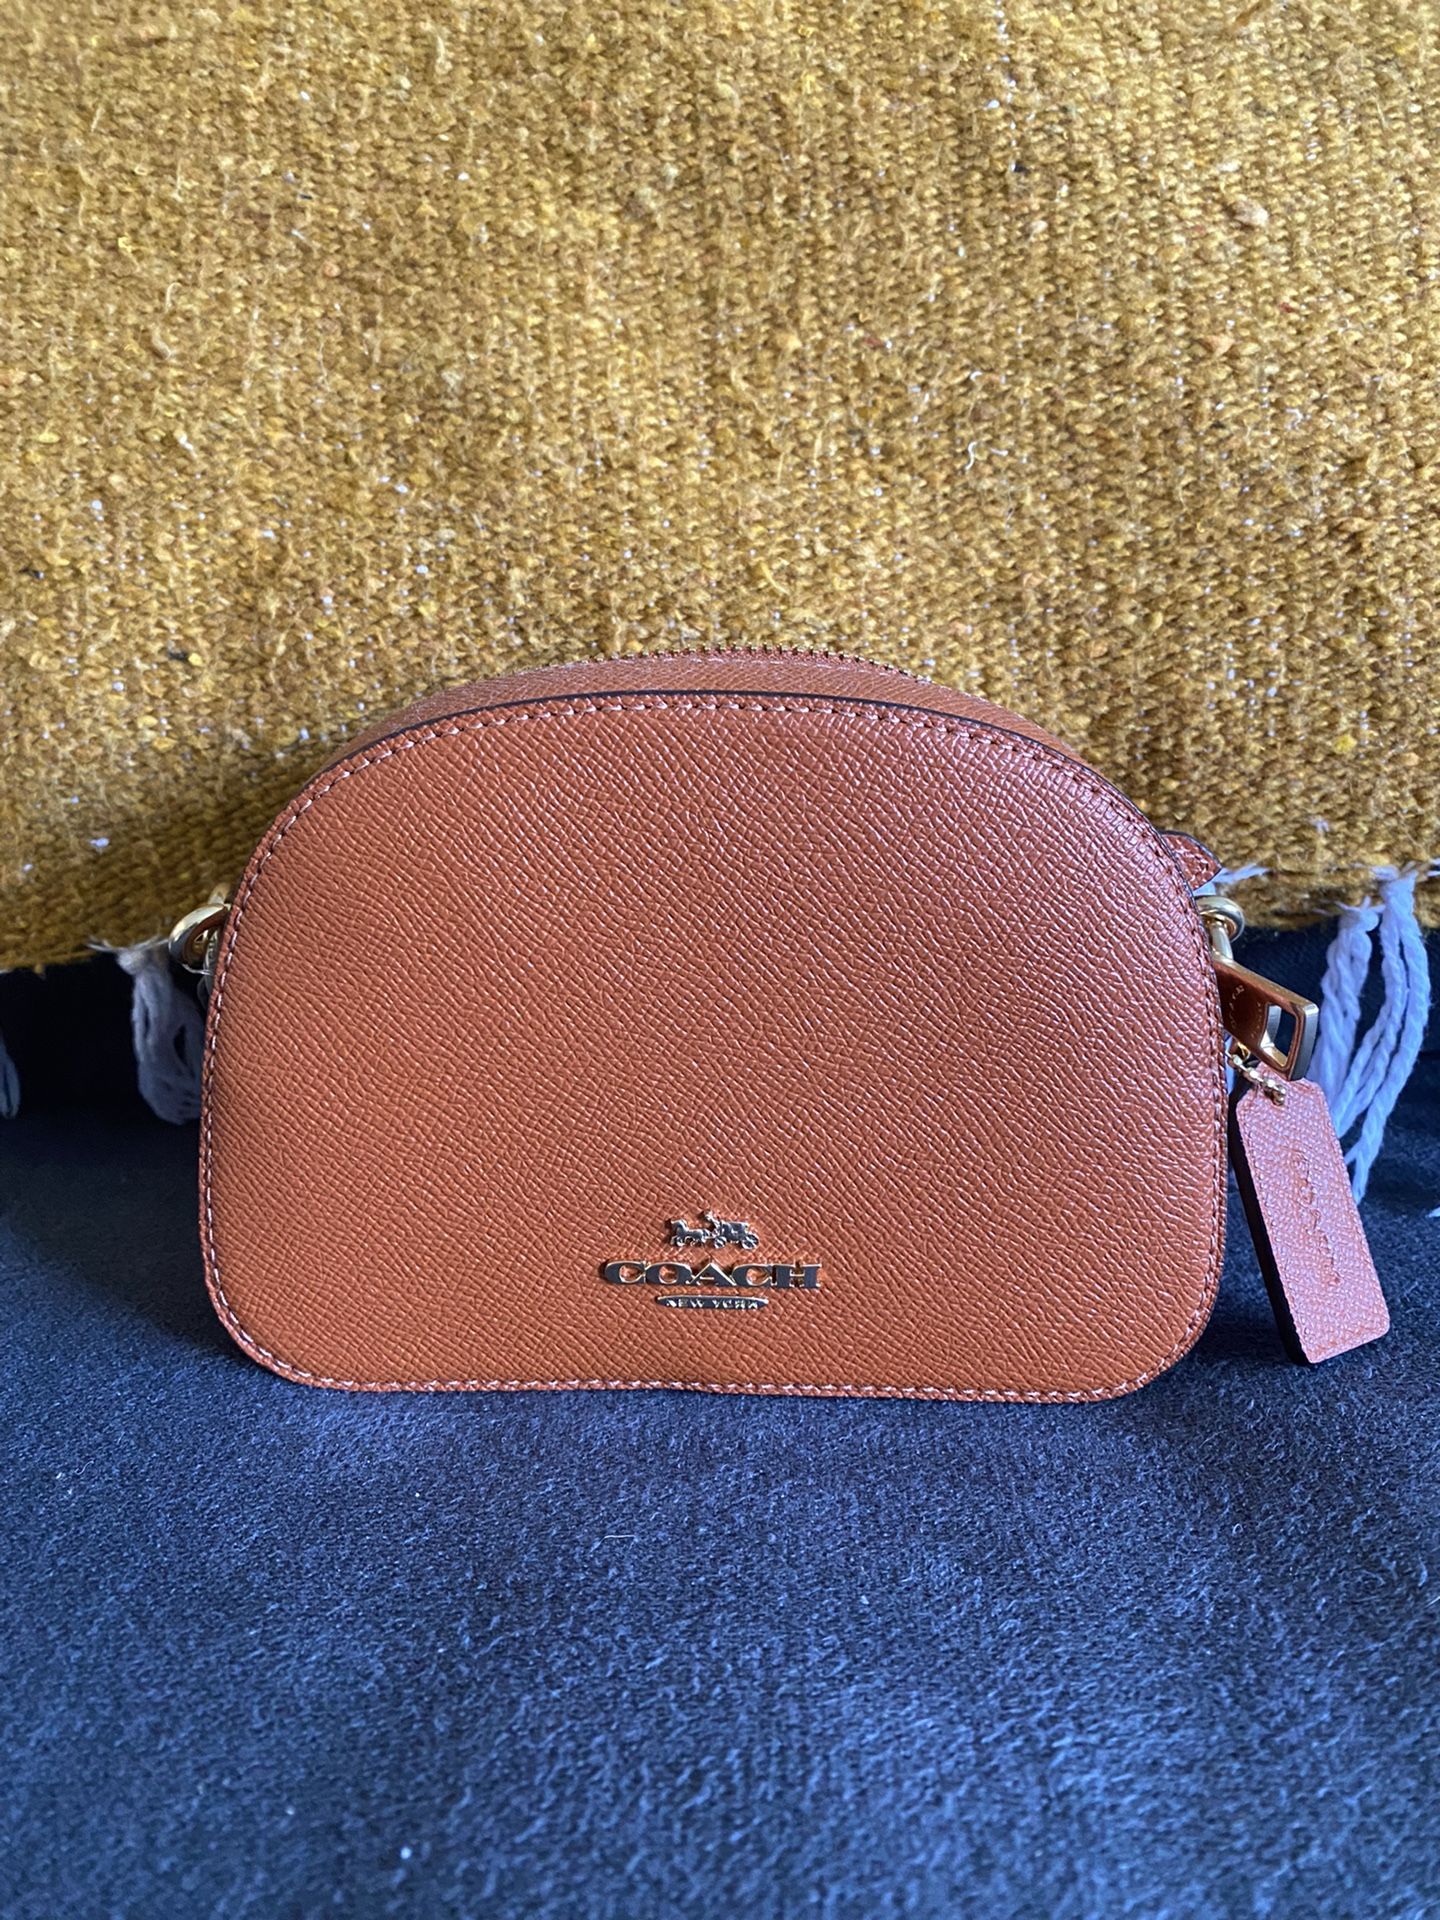 Brand New Coach Purse and Wallet